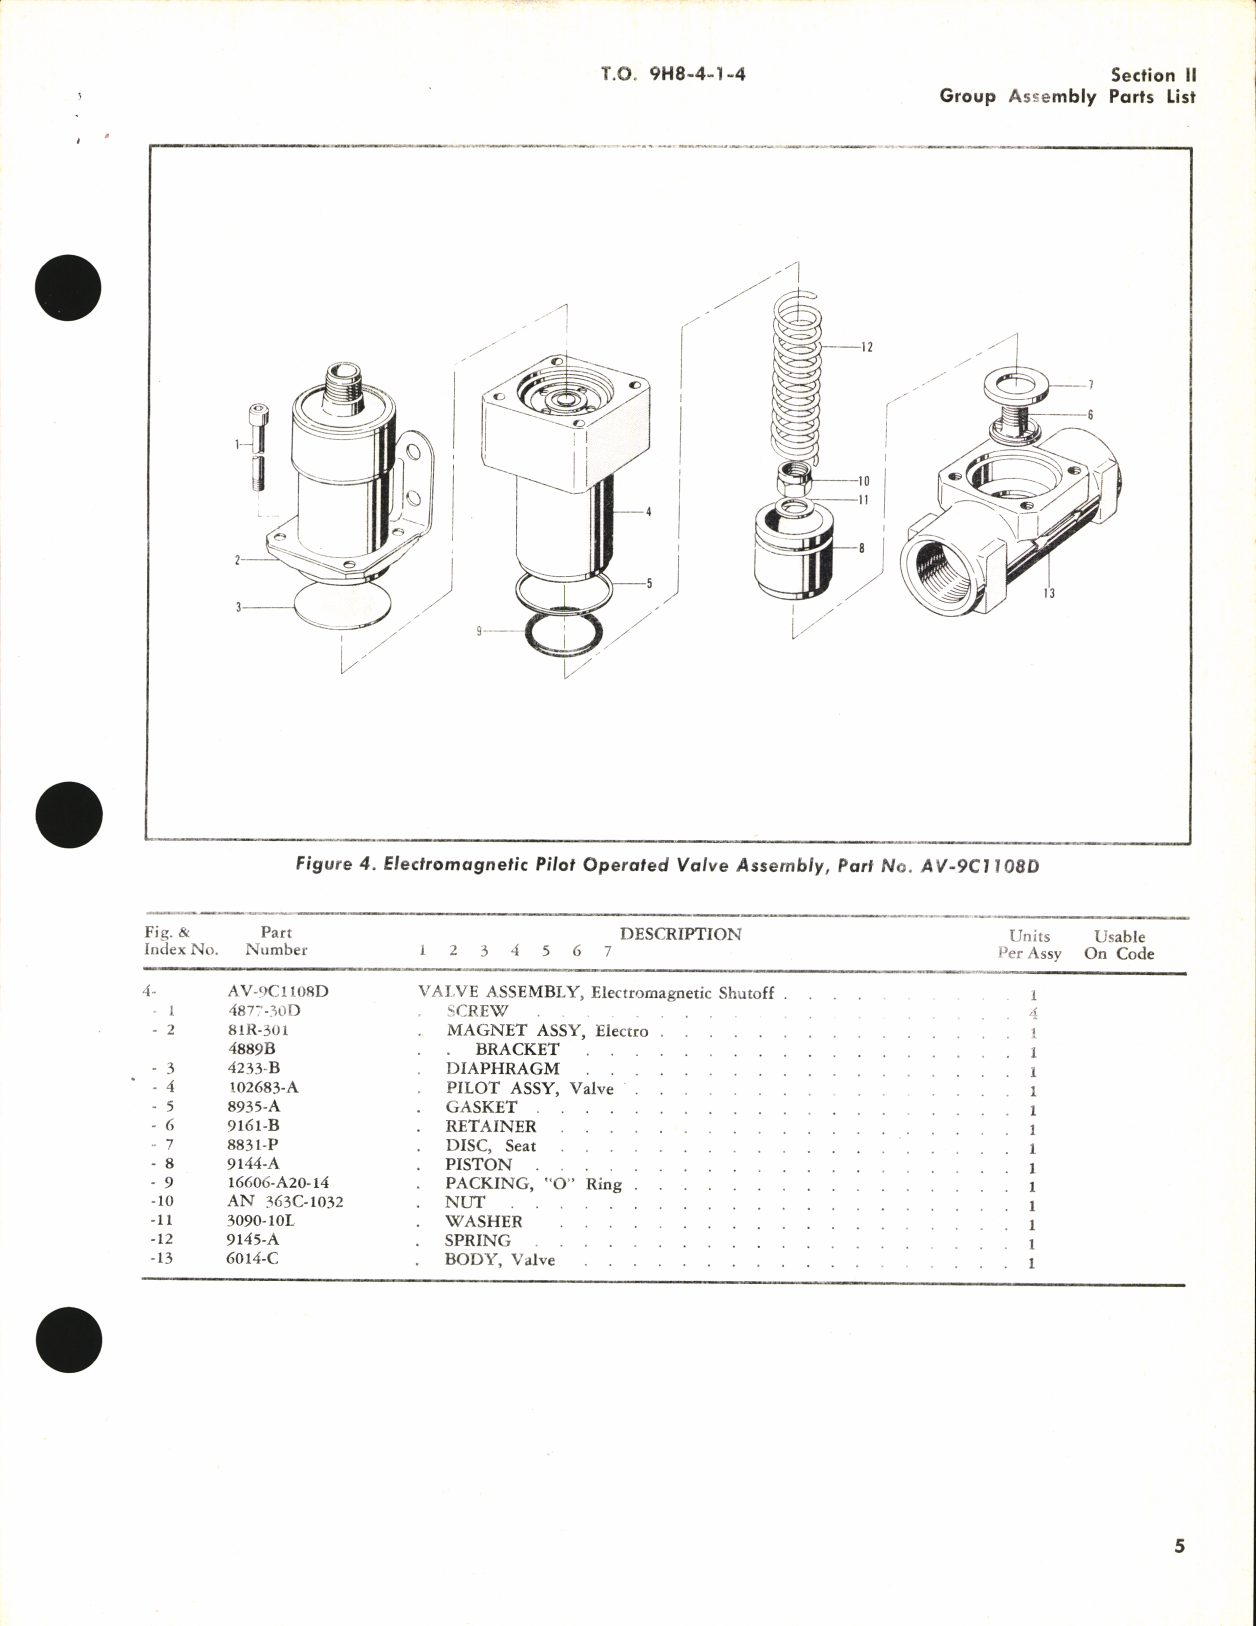 Sample page 7 from AirCorps Library document: Illustrated Parts breakdown for Electromagnetic Pilot Operated Valve AV-9 Series, Part No. AV-9A1105 and Similar Valves